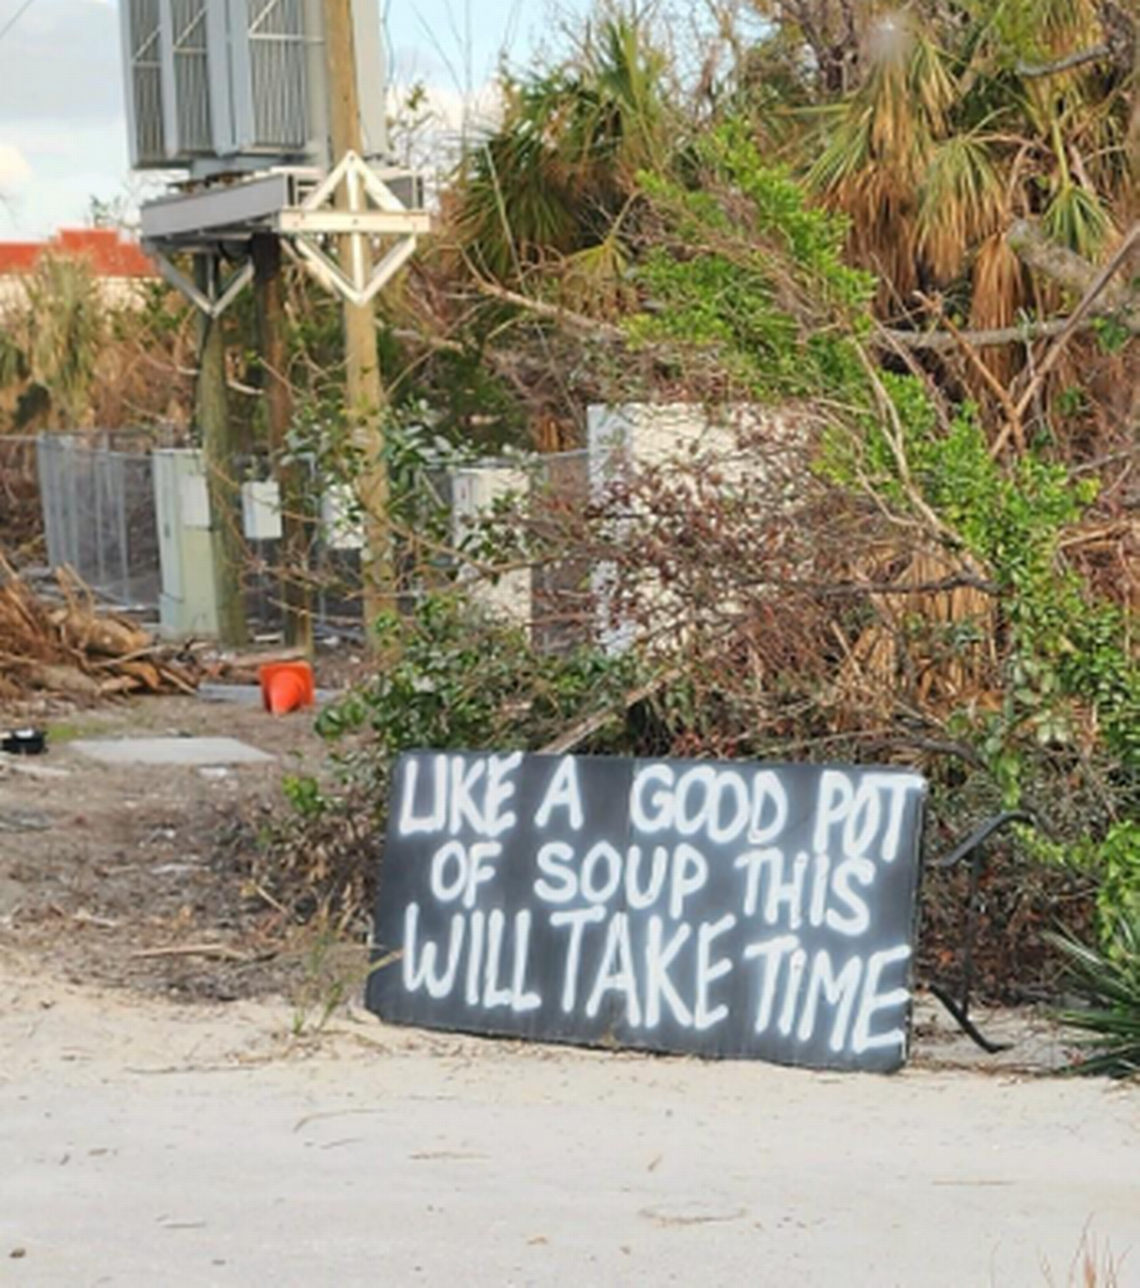 Spray-painted signs with uplifting messages sprung up on Sanibel Island following Hurricane Ian. The sentiment for rebuilding and restoration has remained strong, despite the damage and trauma.